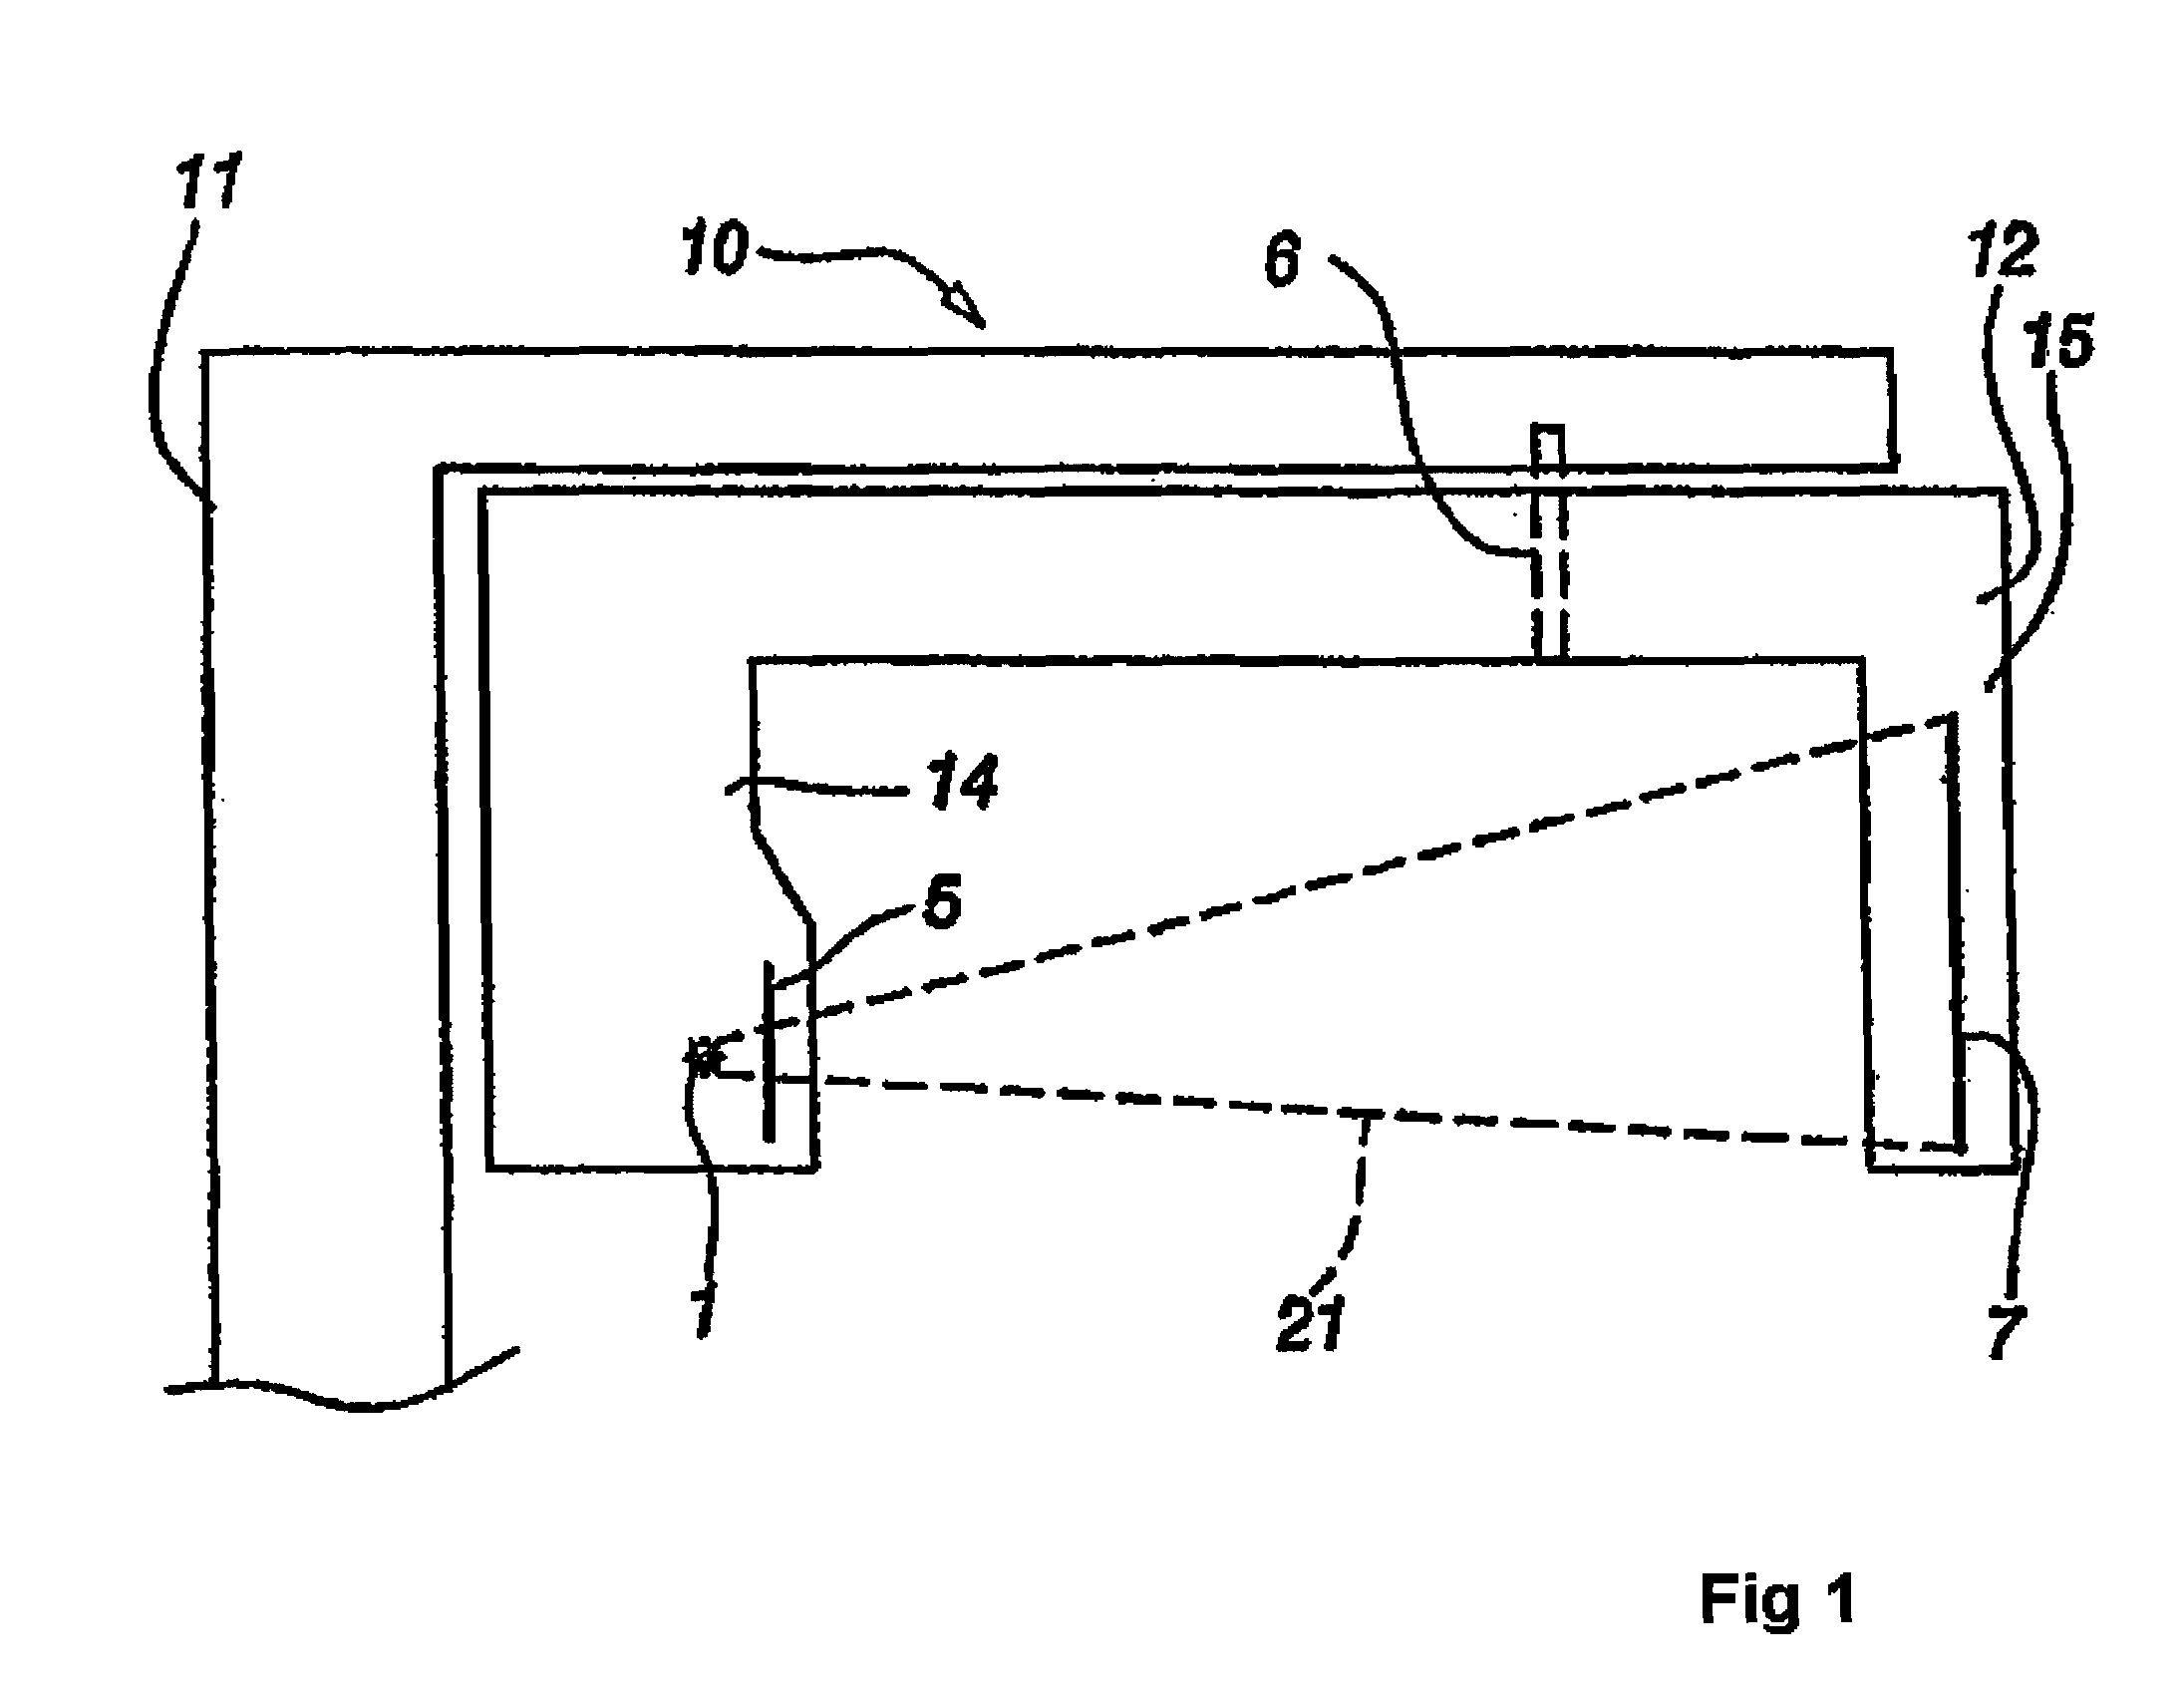 Method and Apparatus for Medical X-radiography